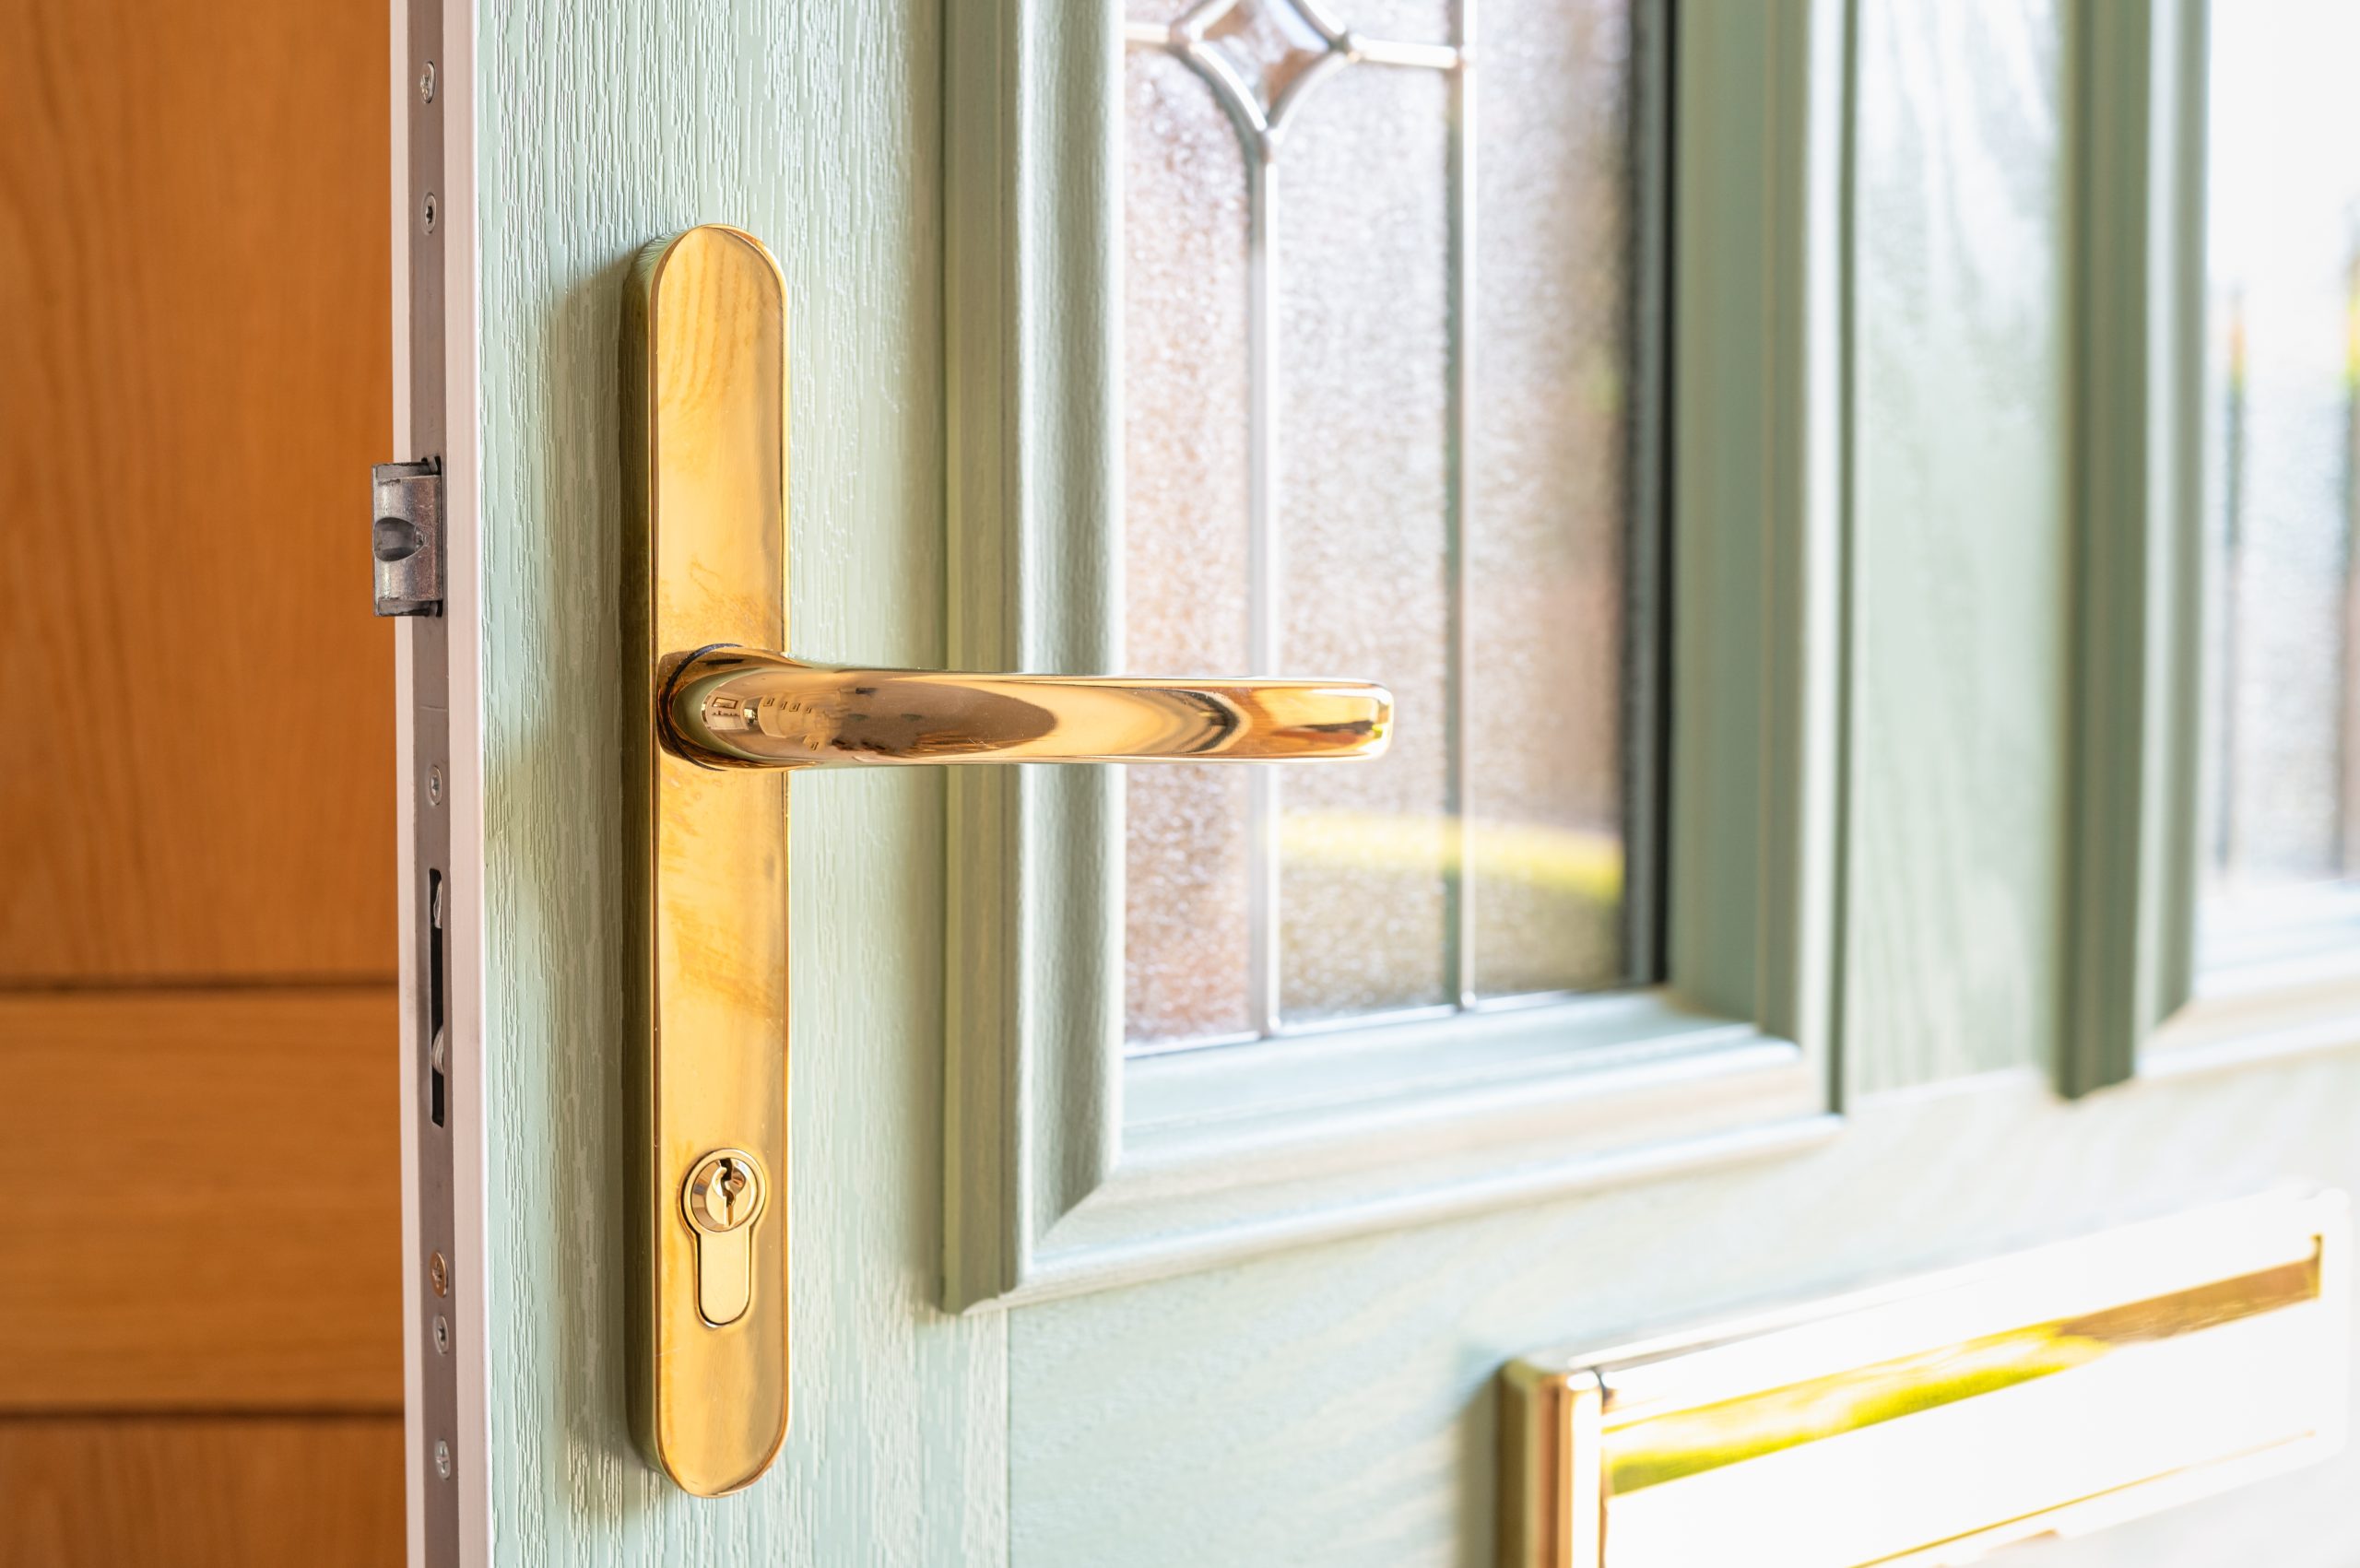 What Are The Safety Features Of A Composite Door?